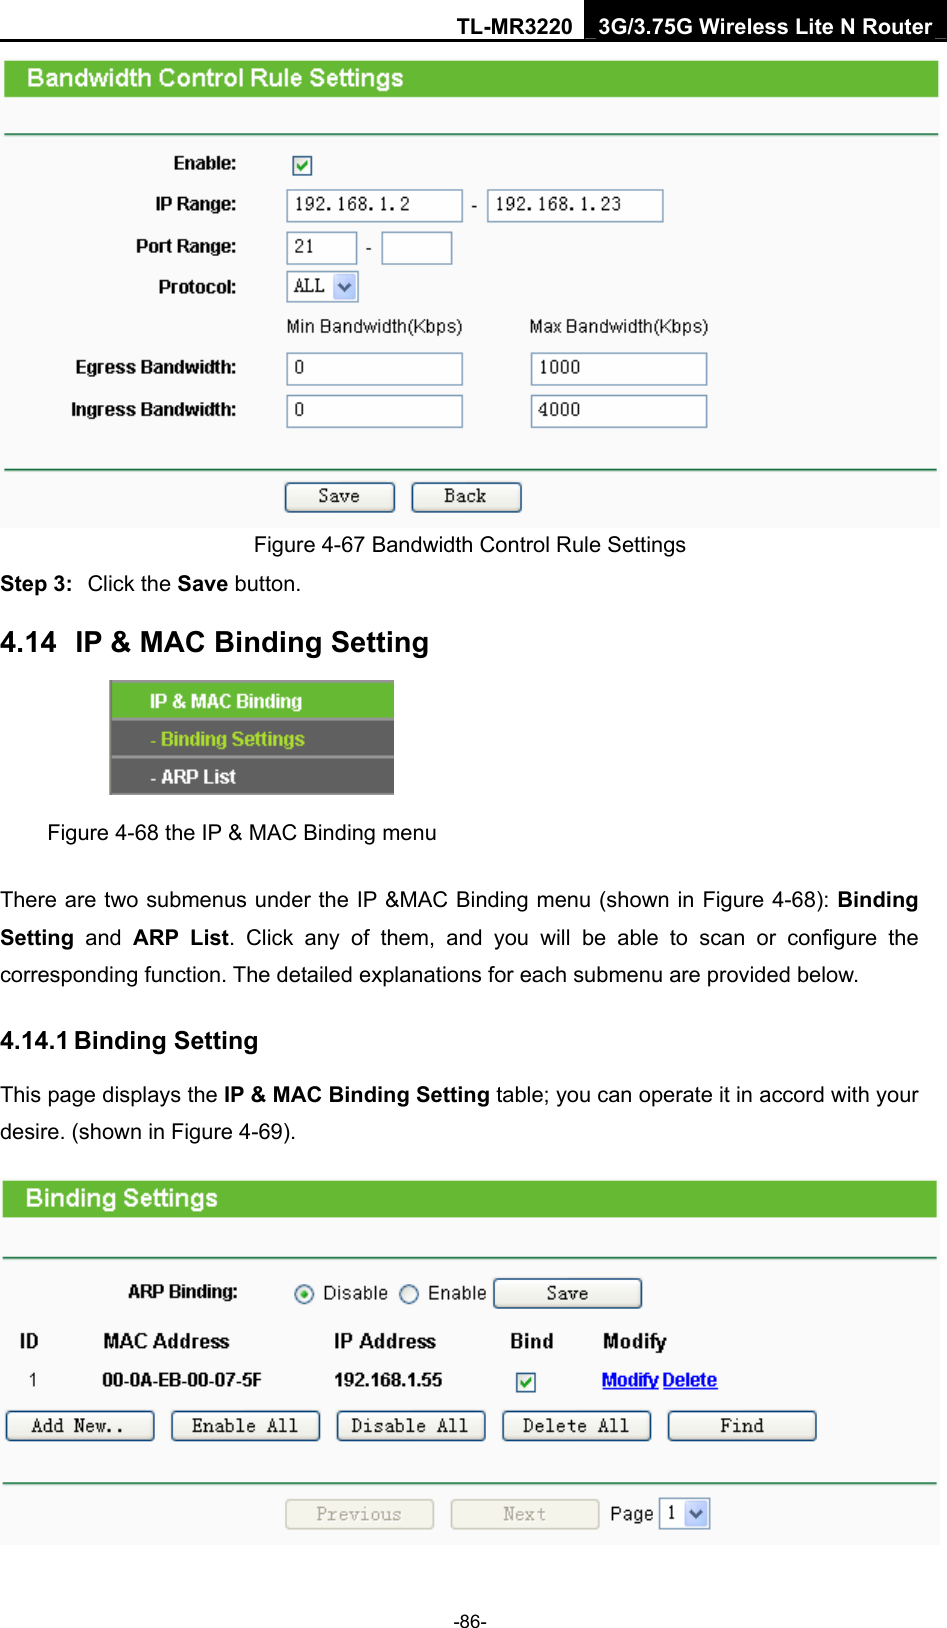 TL-MR3220 3G/3.75G Wireless Lite N Router -86-  Figure 4-67 Bandwidth Control Rule Settings Step 3:  Click the Save button. 4.14  IP &amp; MAC Binding Setting  Figure 4-68 the IP &amp; MAC Binding menu There are two submenus under the IP &amp;MAC Binding menu (shown in Figure 4-68): Binding Setting  and ARP List. Click any of them, and you will be able to scan or configure the corresponding function. The detailed explanations for each submenu are provided below. 4.14.1 Binding Setting This page displays the IP &amp; MAC Binding Setting table; you can operate it in accord with your desire. (shown in Figure 4-69).    